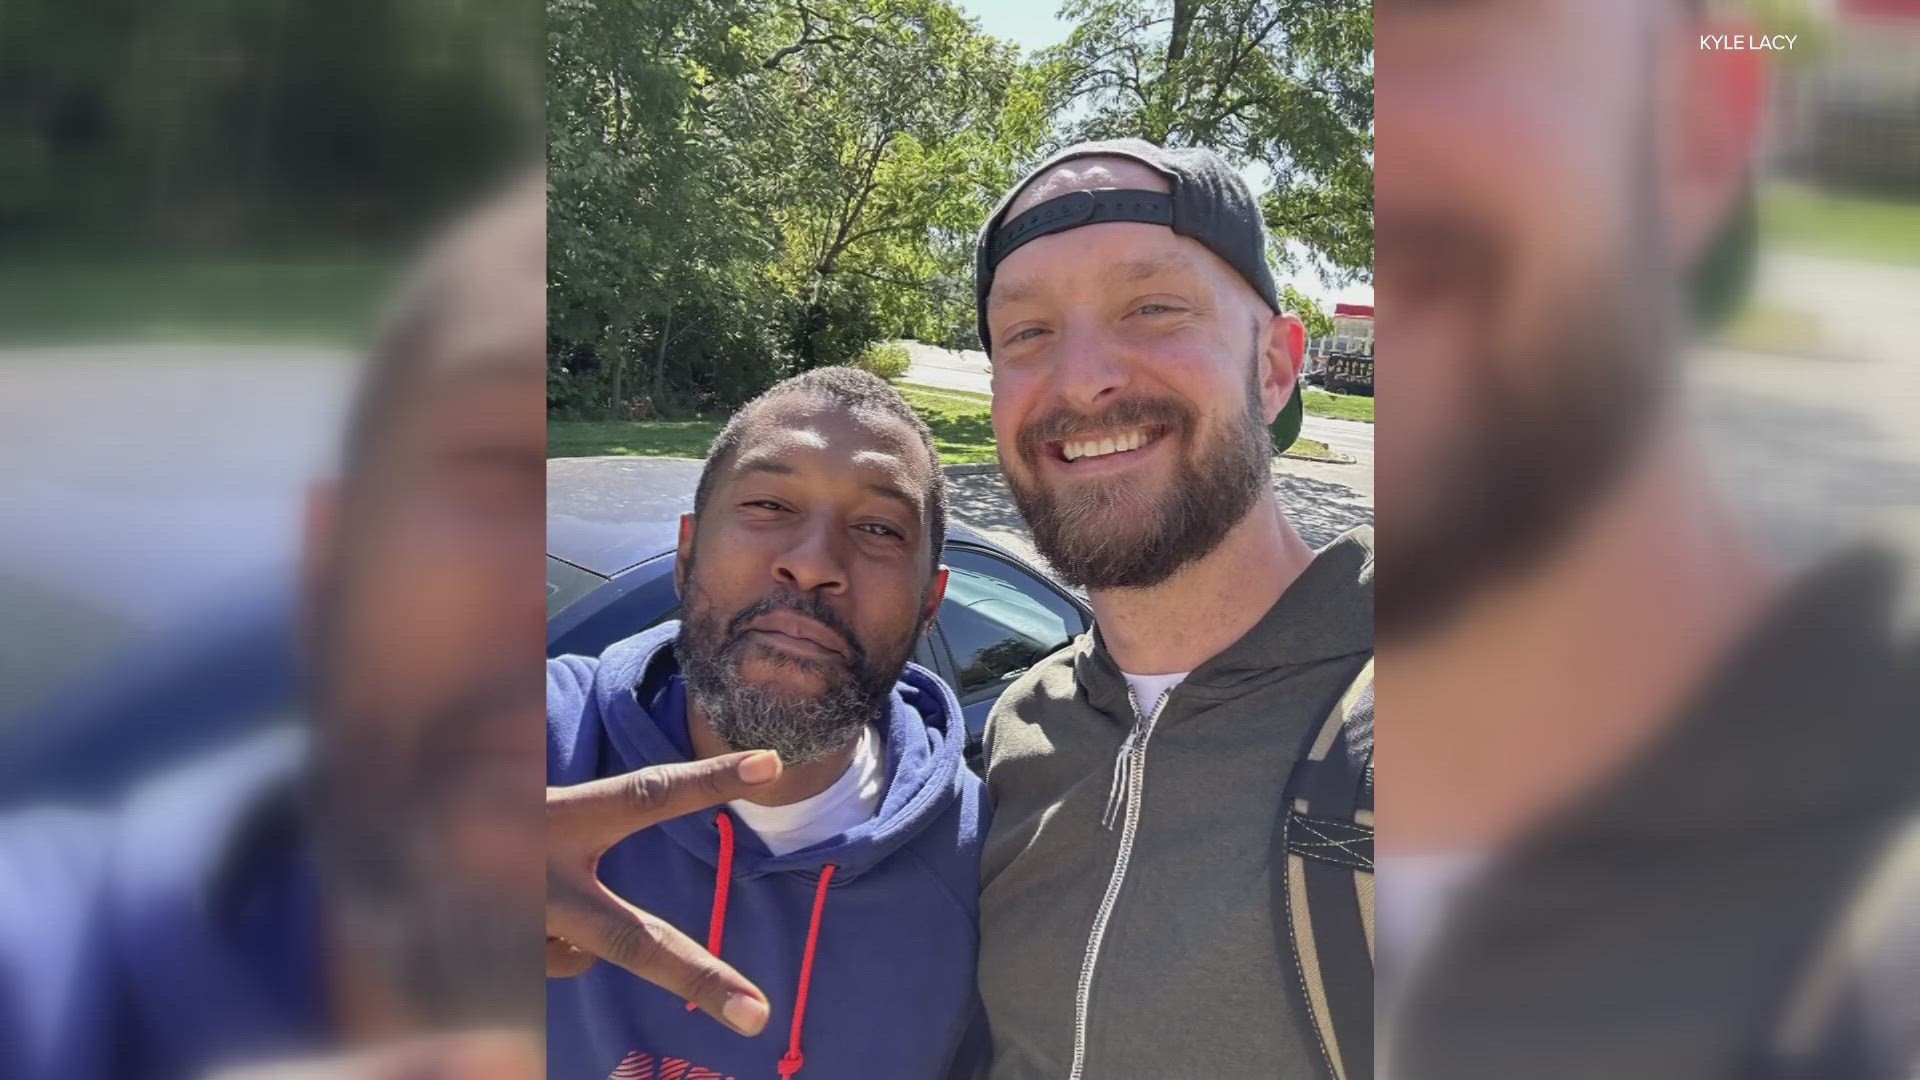 One act of kindness helped reunite one person with their long-lost backpack after four years.